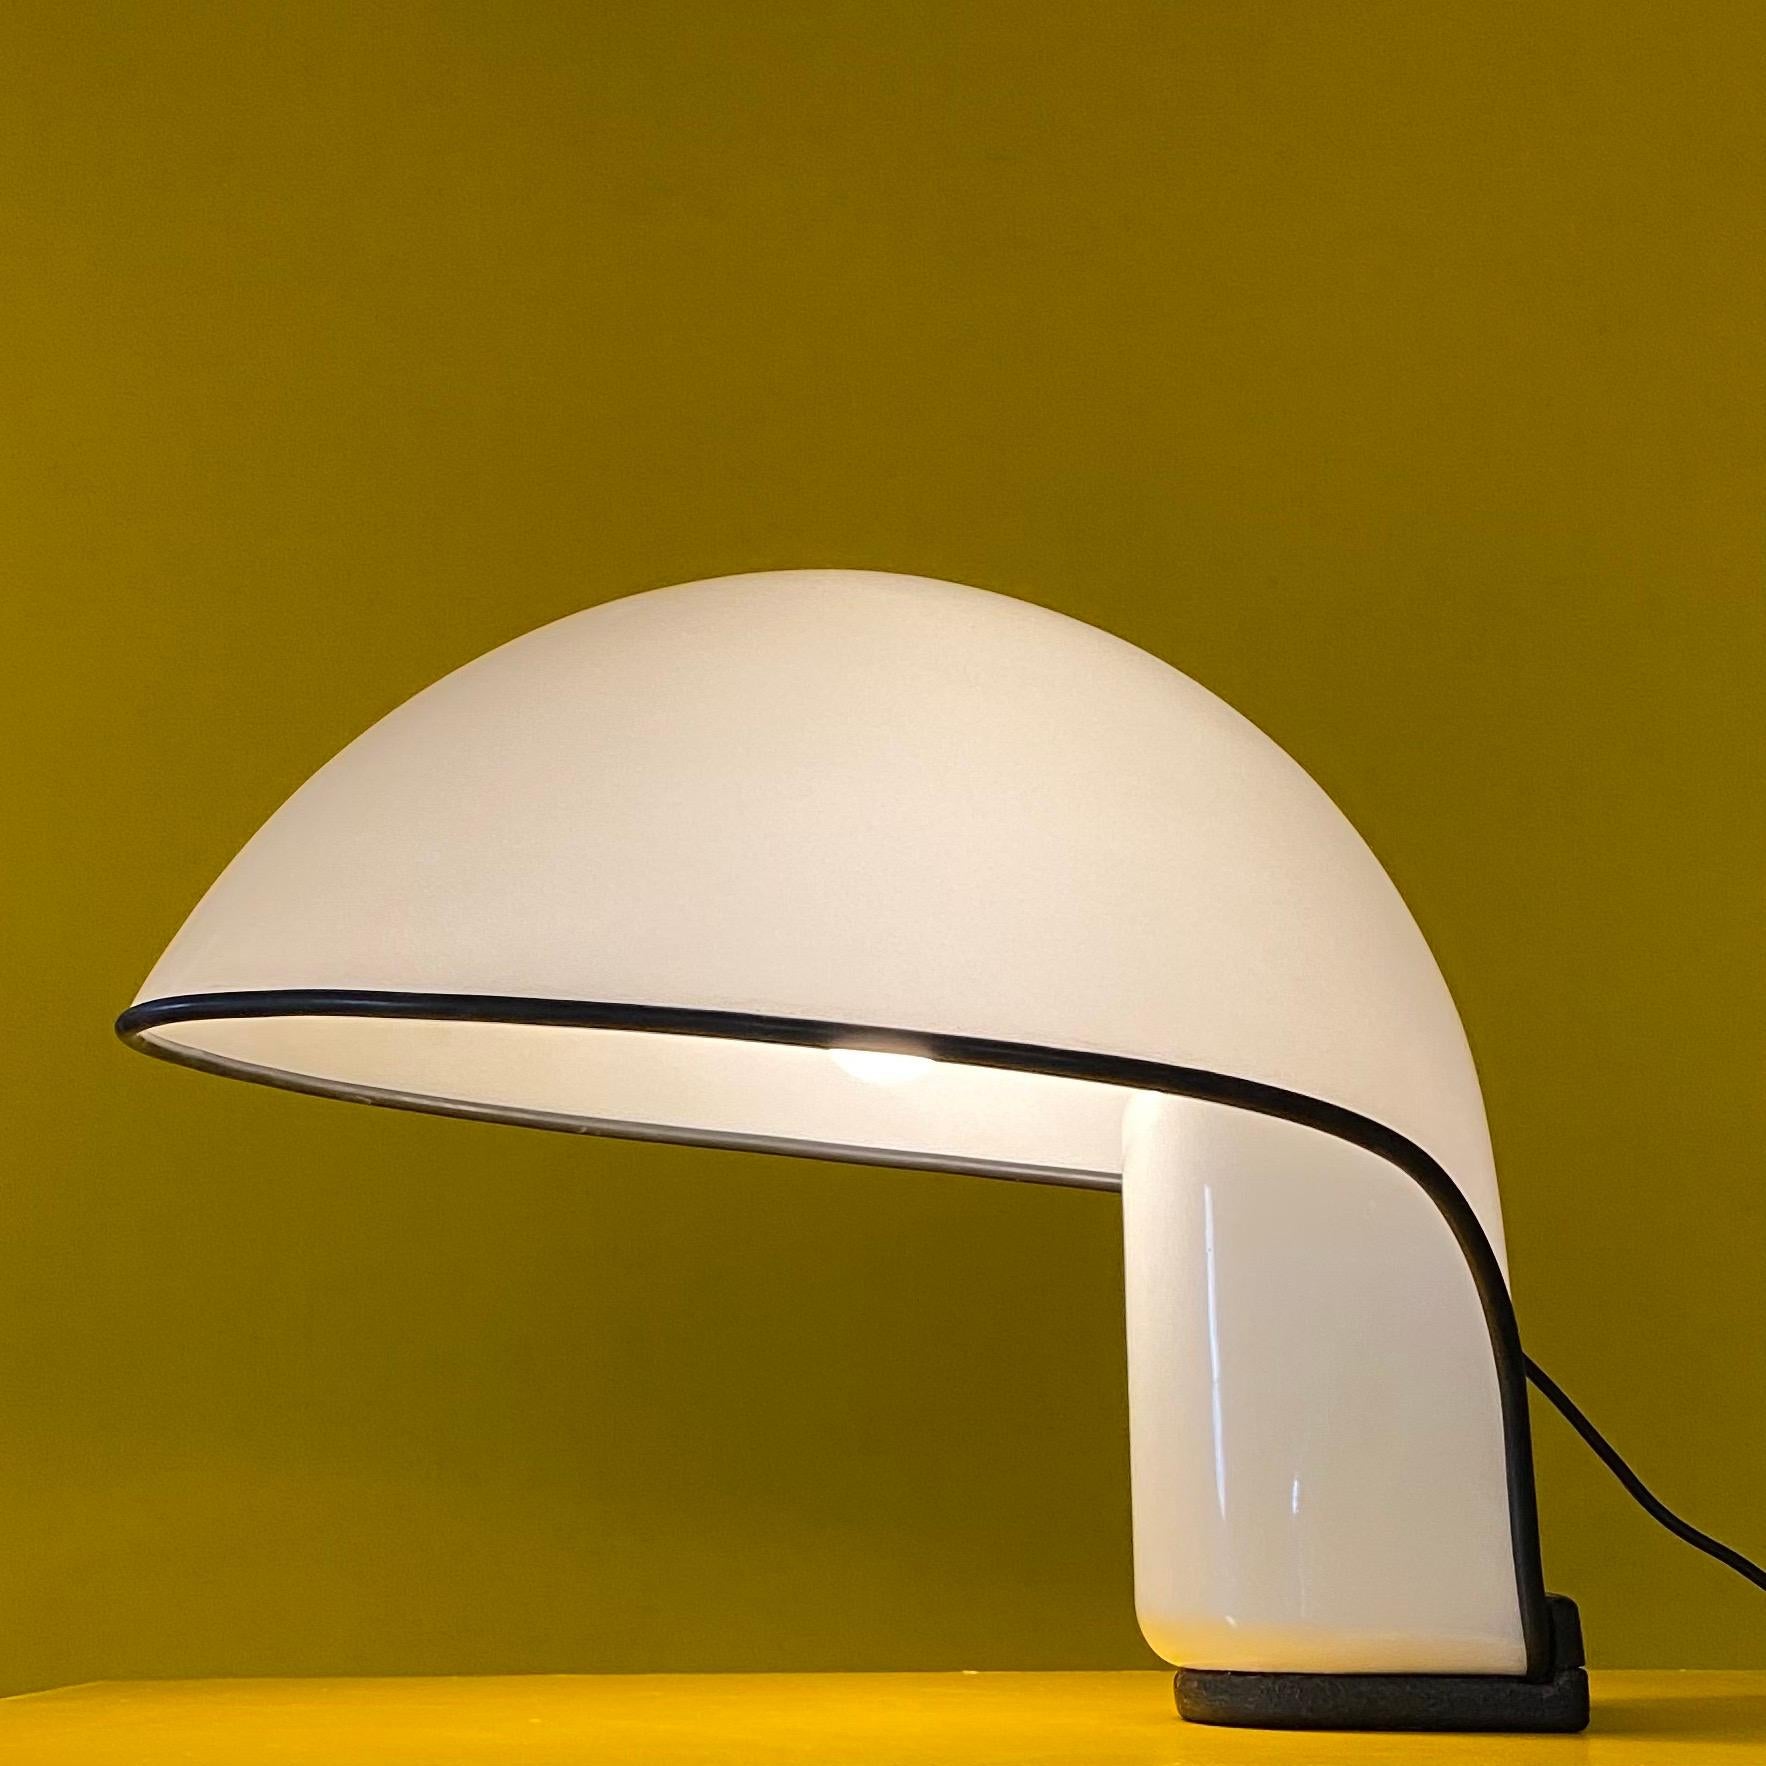 Space Age Albanella Table Lamp by Brazzoli and Lampa for Guzzini, Italy 1973